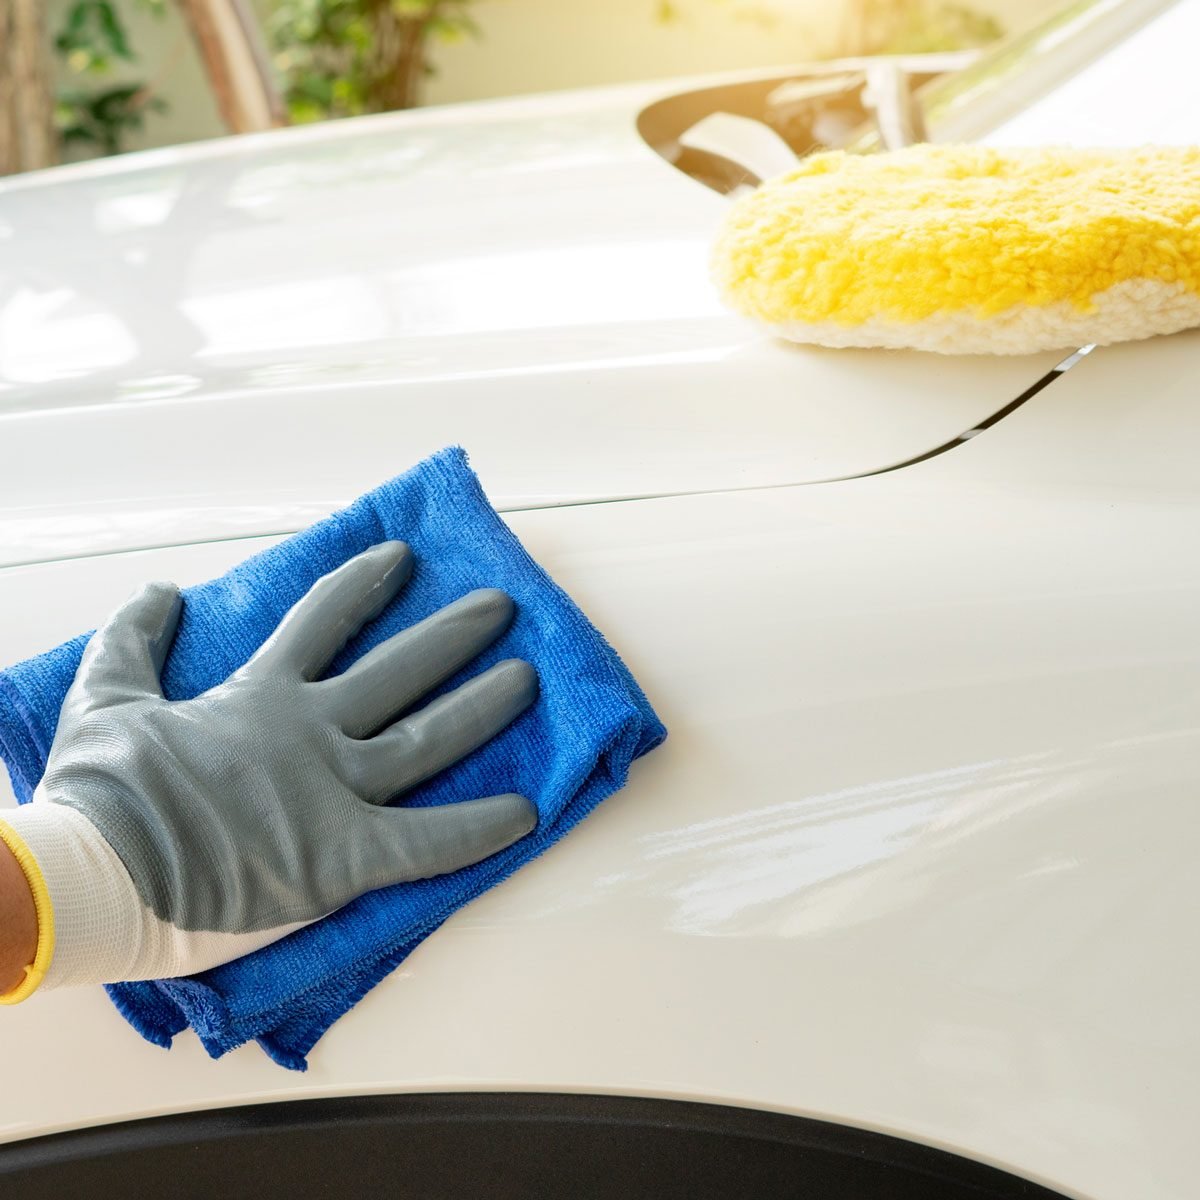 The Best Car Wax Products